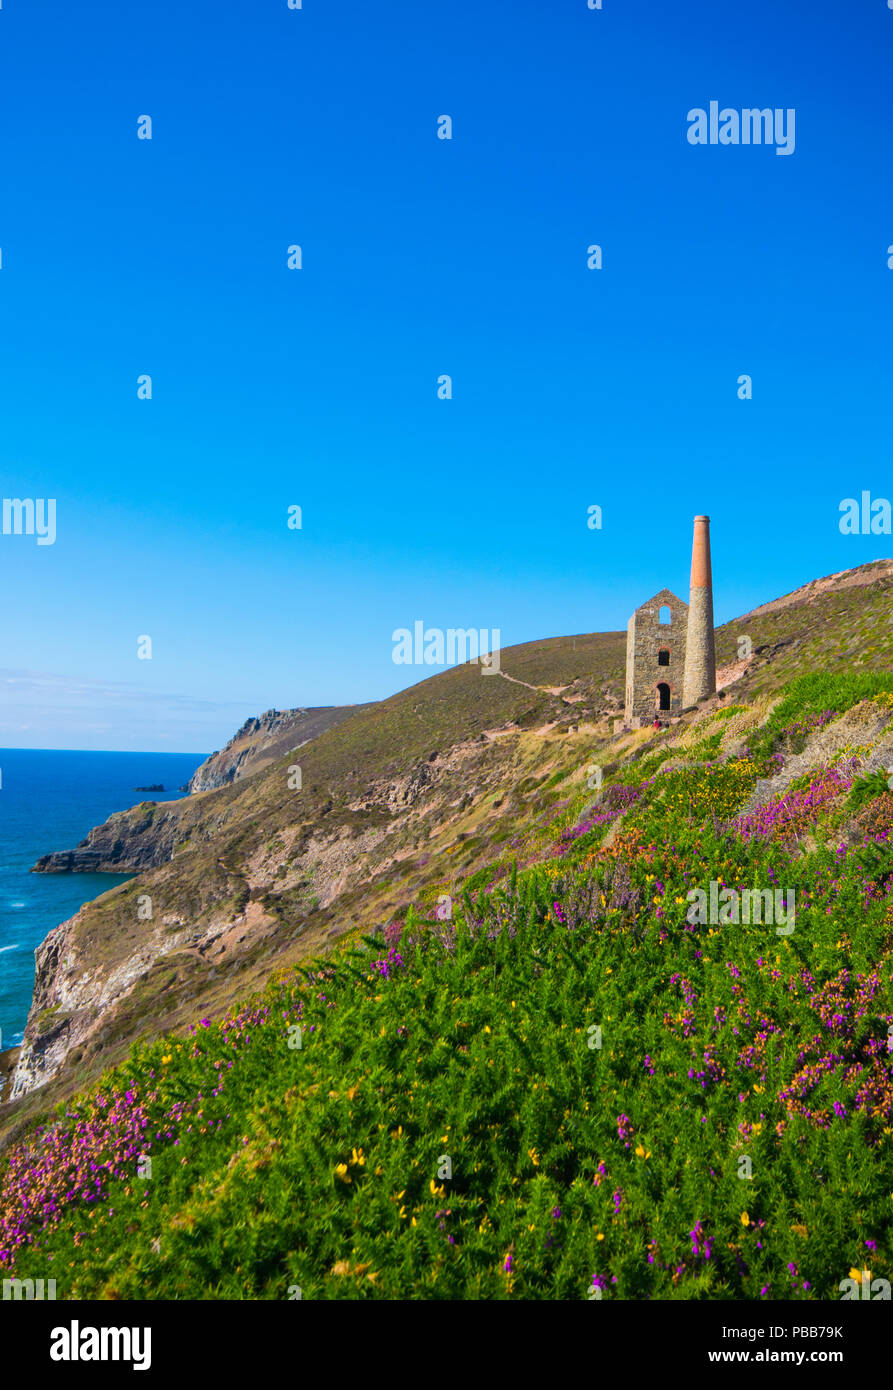 An image of Wheal Coates tin mine along the St. Agnes Heritage Coast in Cornwall, UK. Stock Photo